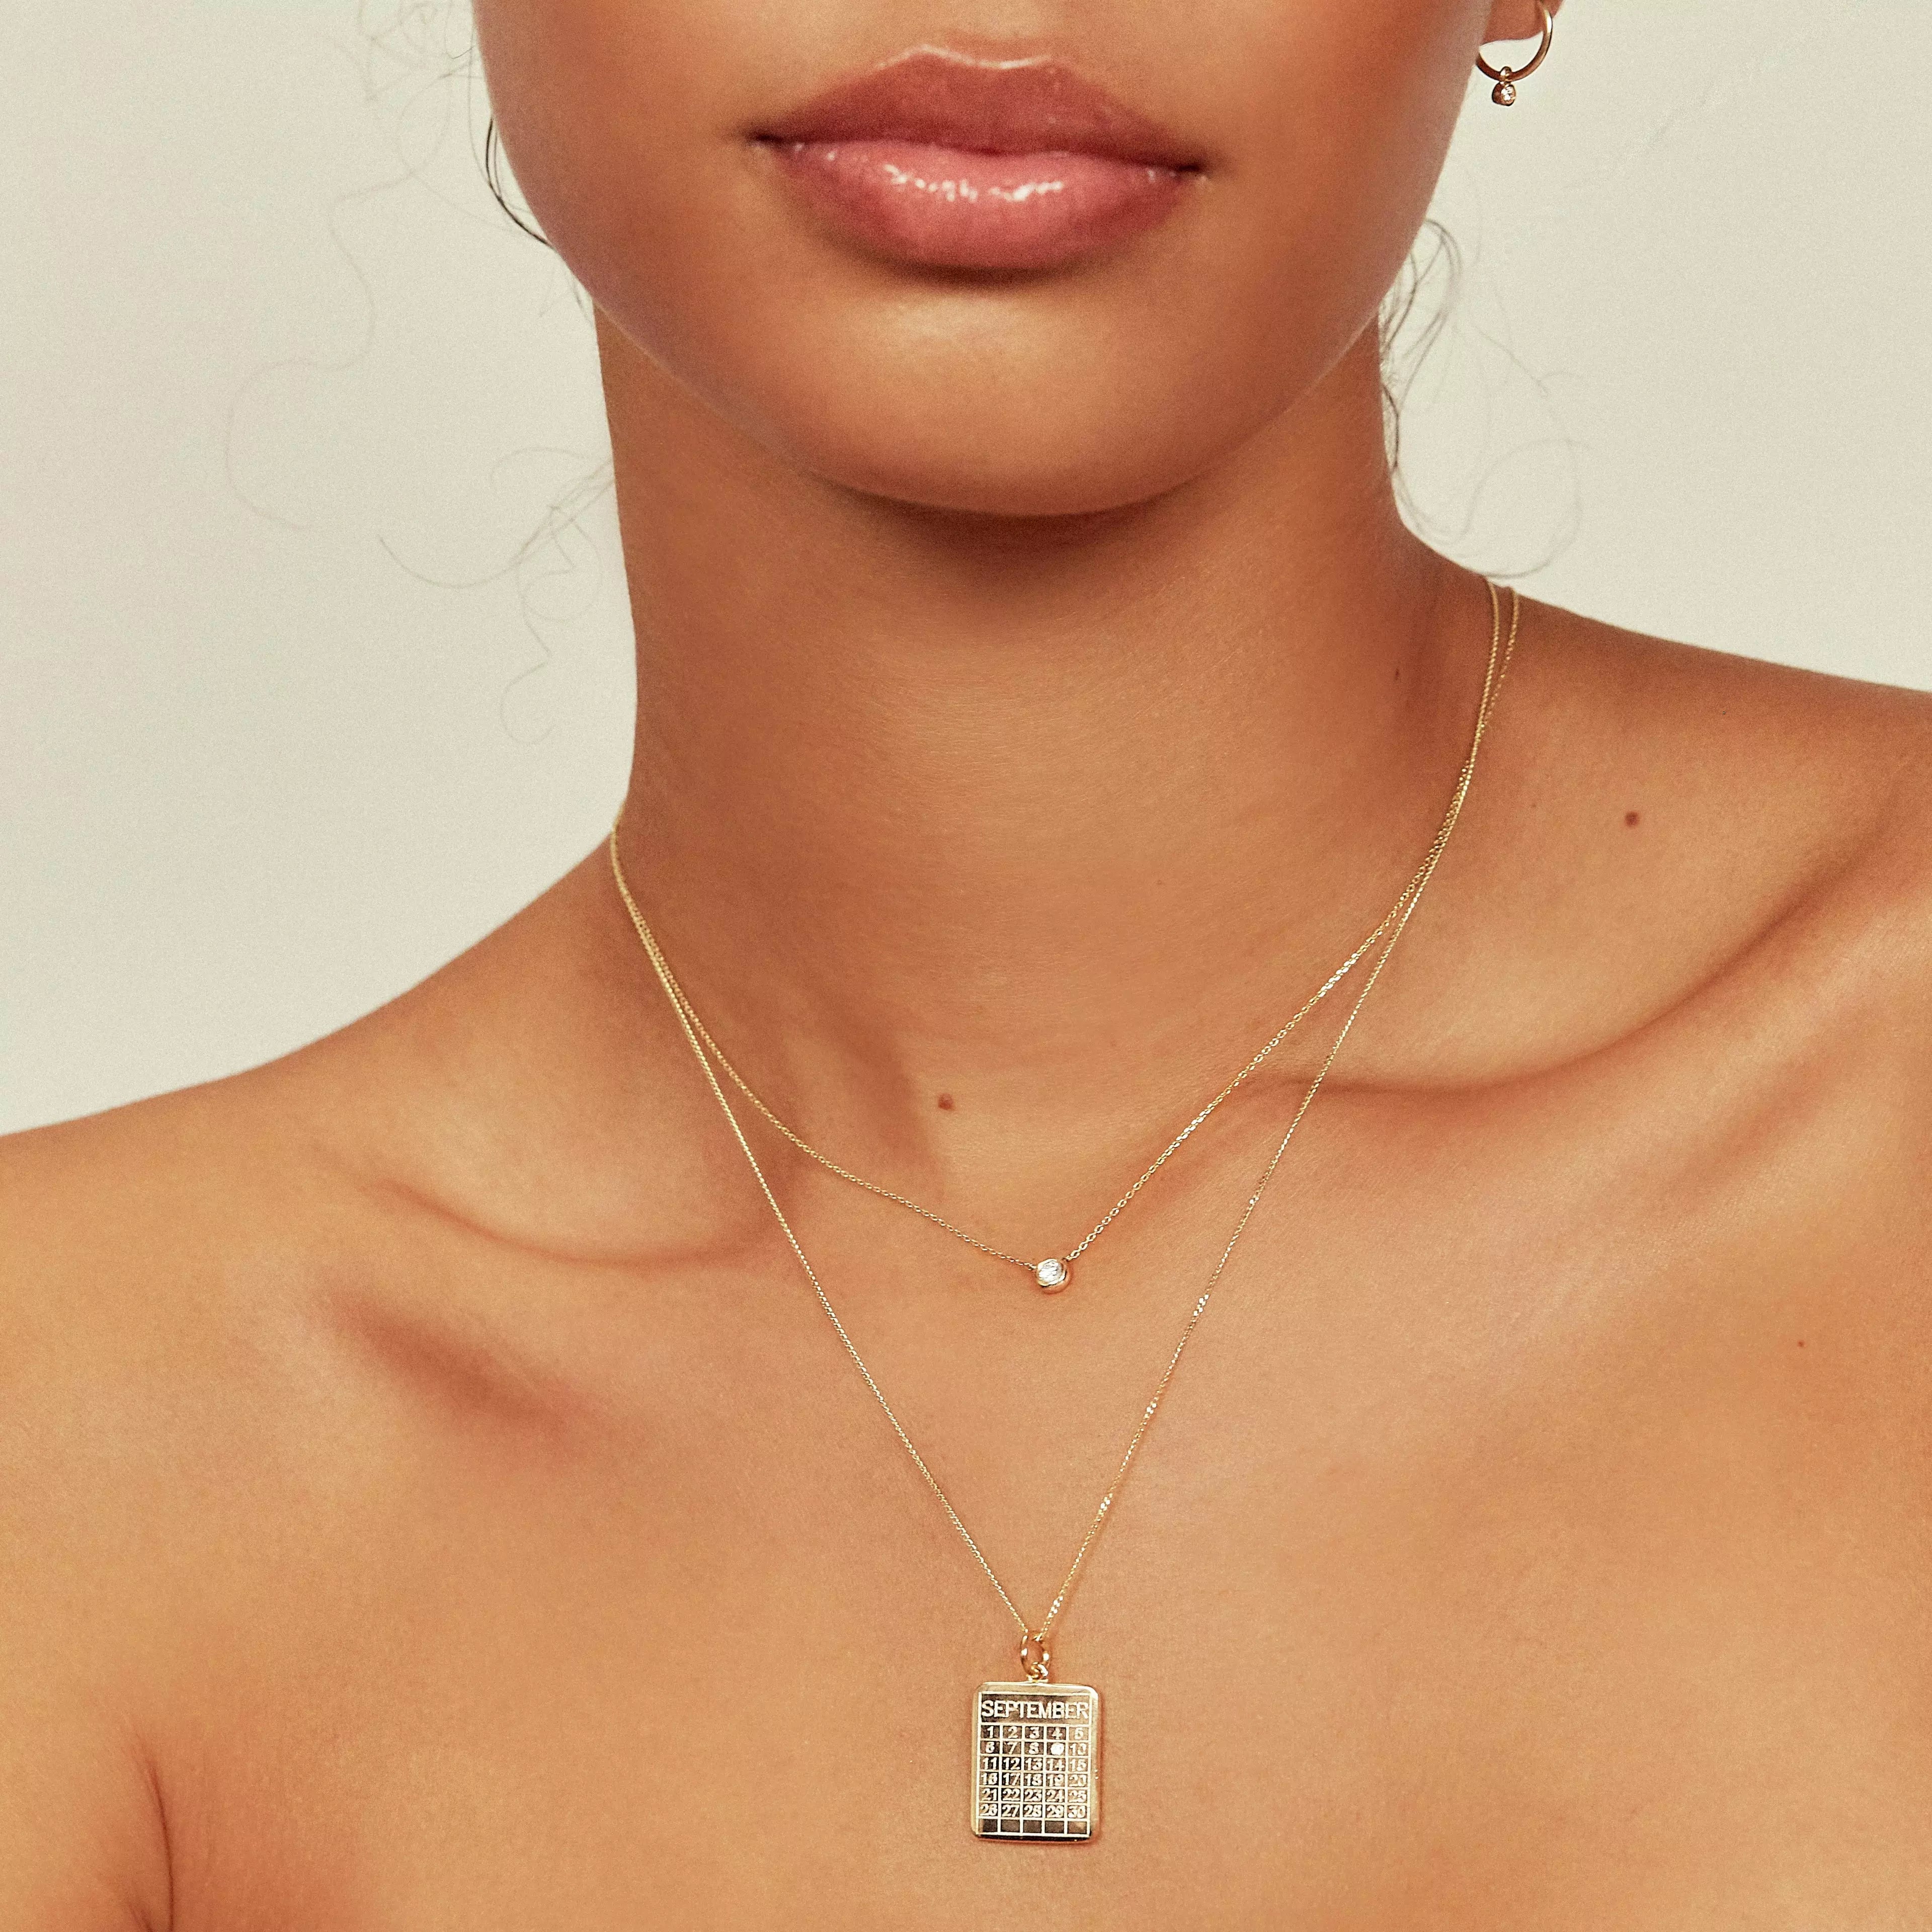 Gold special date calendar necklace 'September' with the gemstone on number '9', layered with a gold single pearl choker around the neck of a woman 